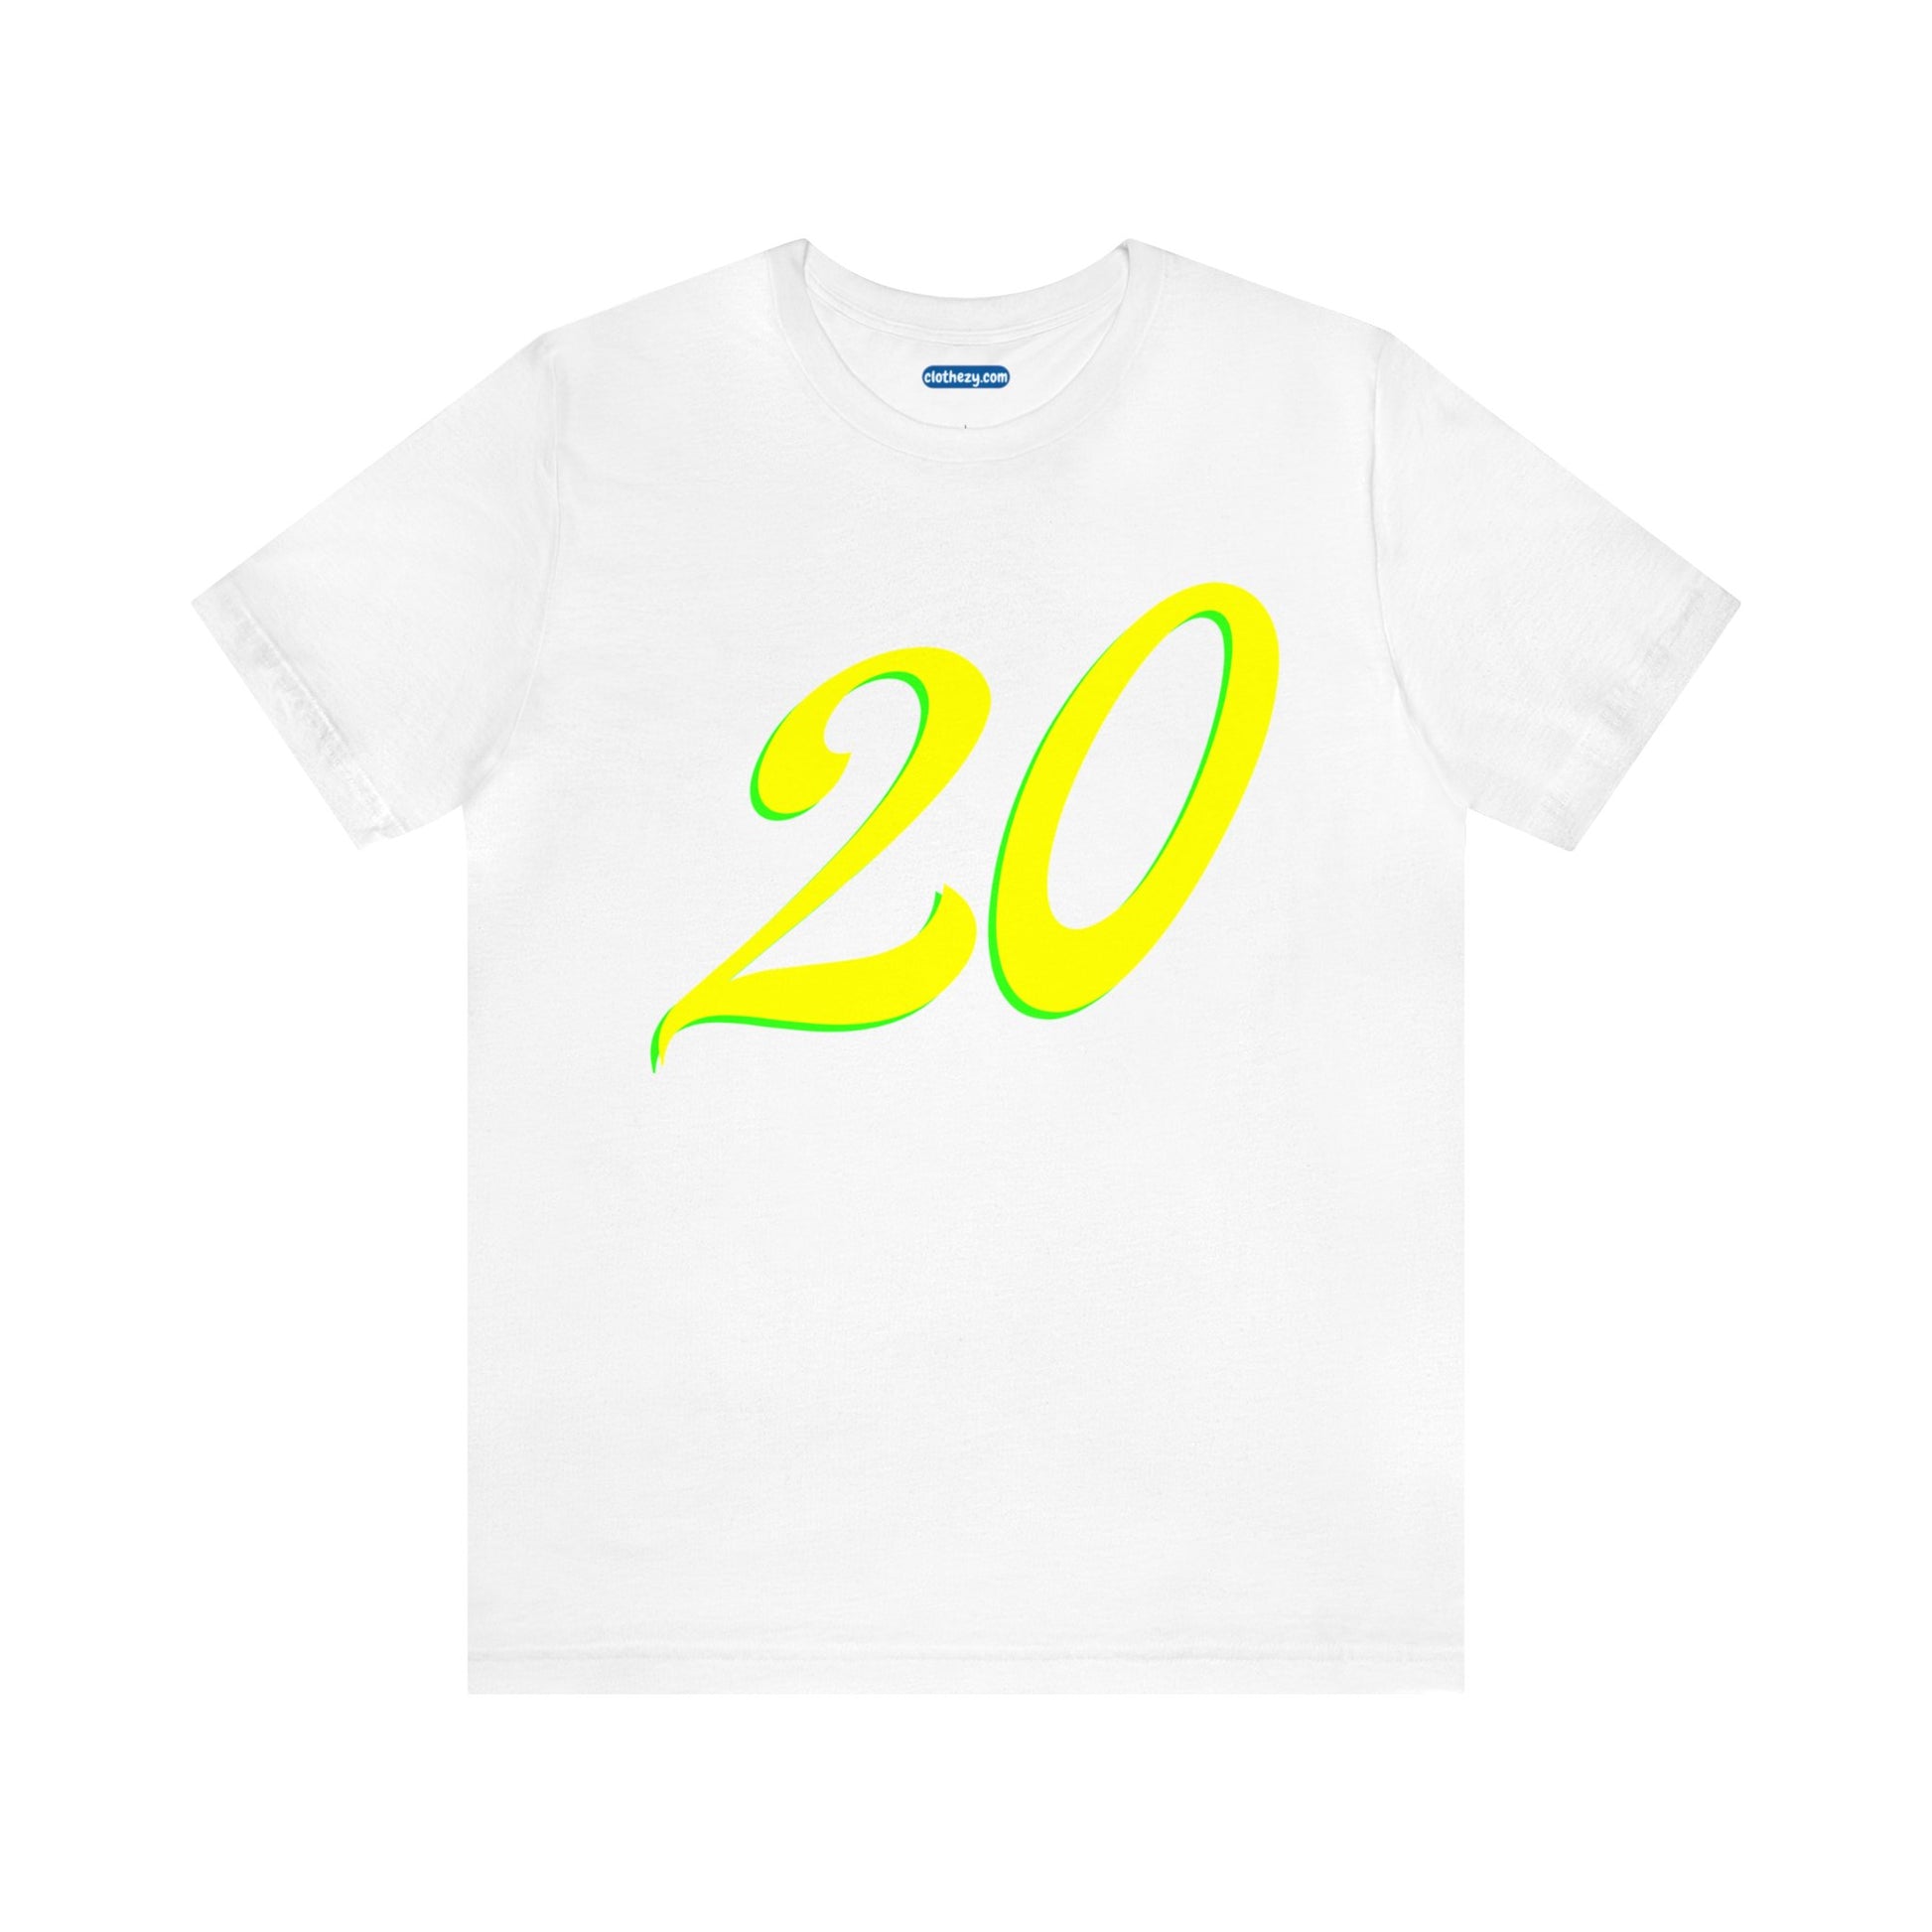 Number 20 Design - Soft Cotton Tee for birthdays and celebrations, Gift for friends and family, Multiple Options by clothezy.com in White Size Small - Buy Now